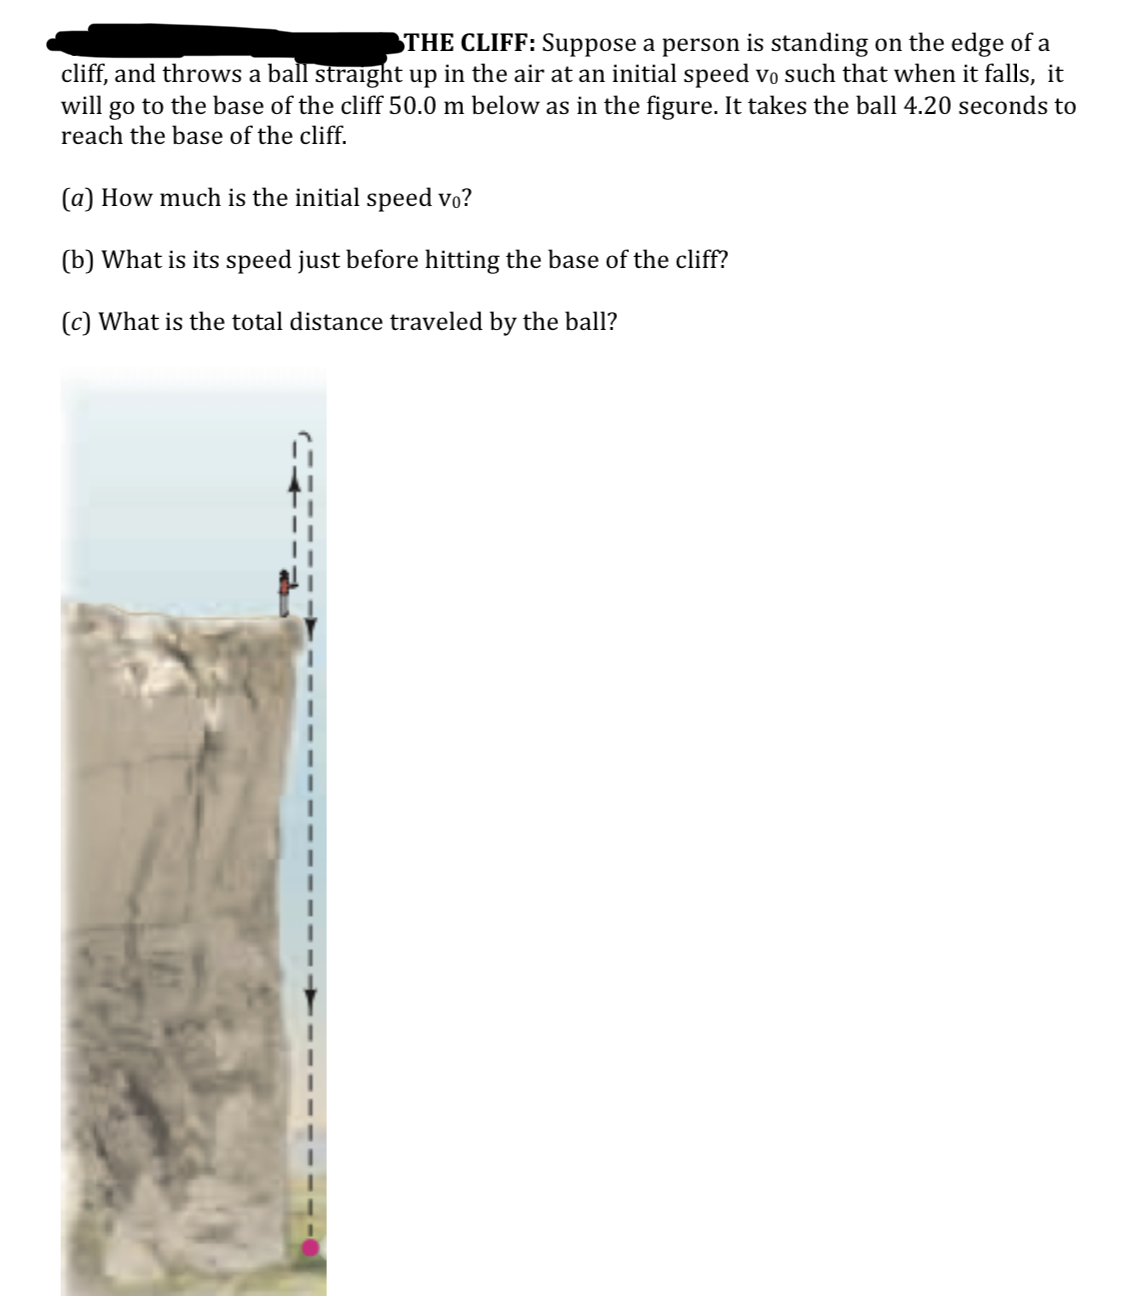 THE CLIFF: Suppose a person is standing on the edge of a
cliff, and throws a ball straight up in the air at an initial speed vo such that when it falls, it
will go to the base of the cliff 50.0 m below as in the figure. It takes the ball 4.20 seconds to
reach the base of the cliff.
(a) How much is the initial speed vo?
(b) What is its speed just before hitting the base of the cliff?
(c) What is the total distance traveled by the ball?
